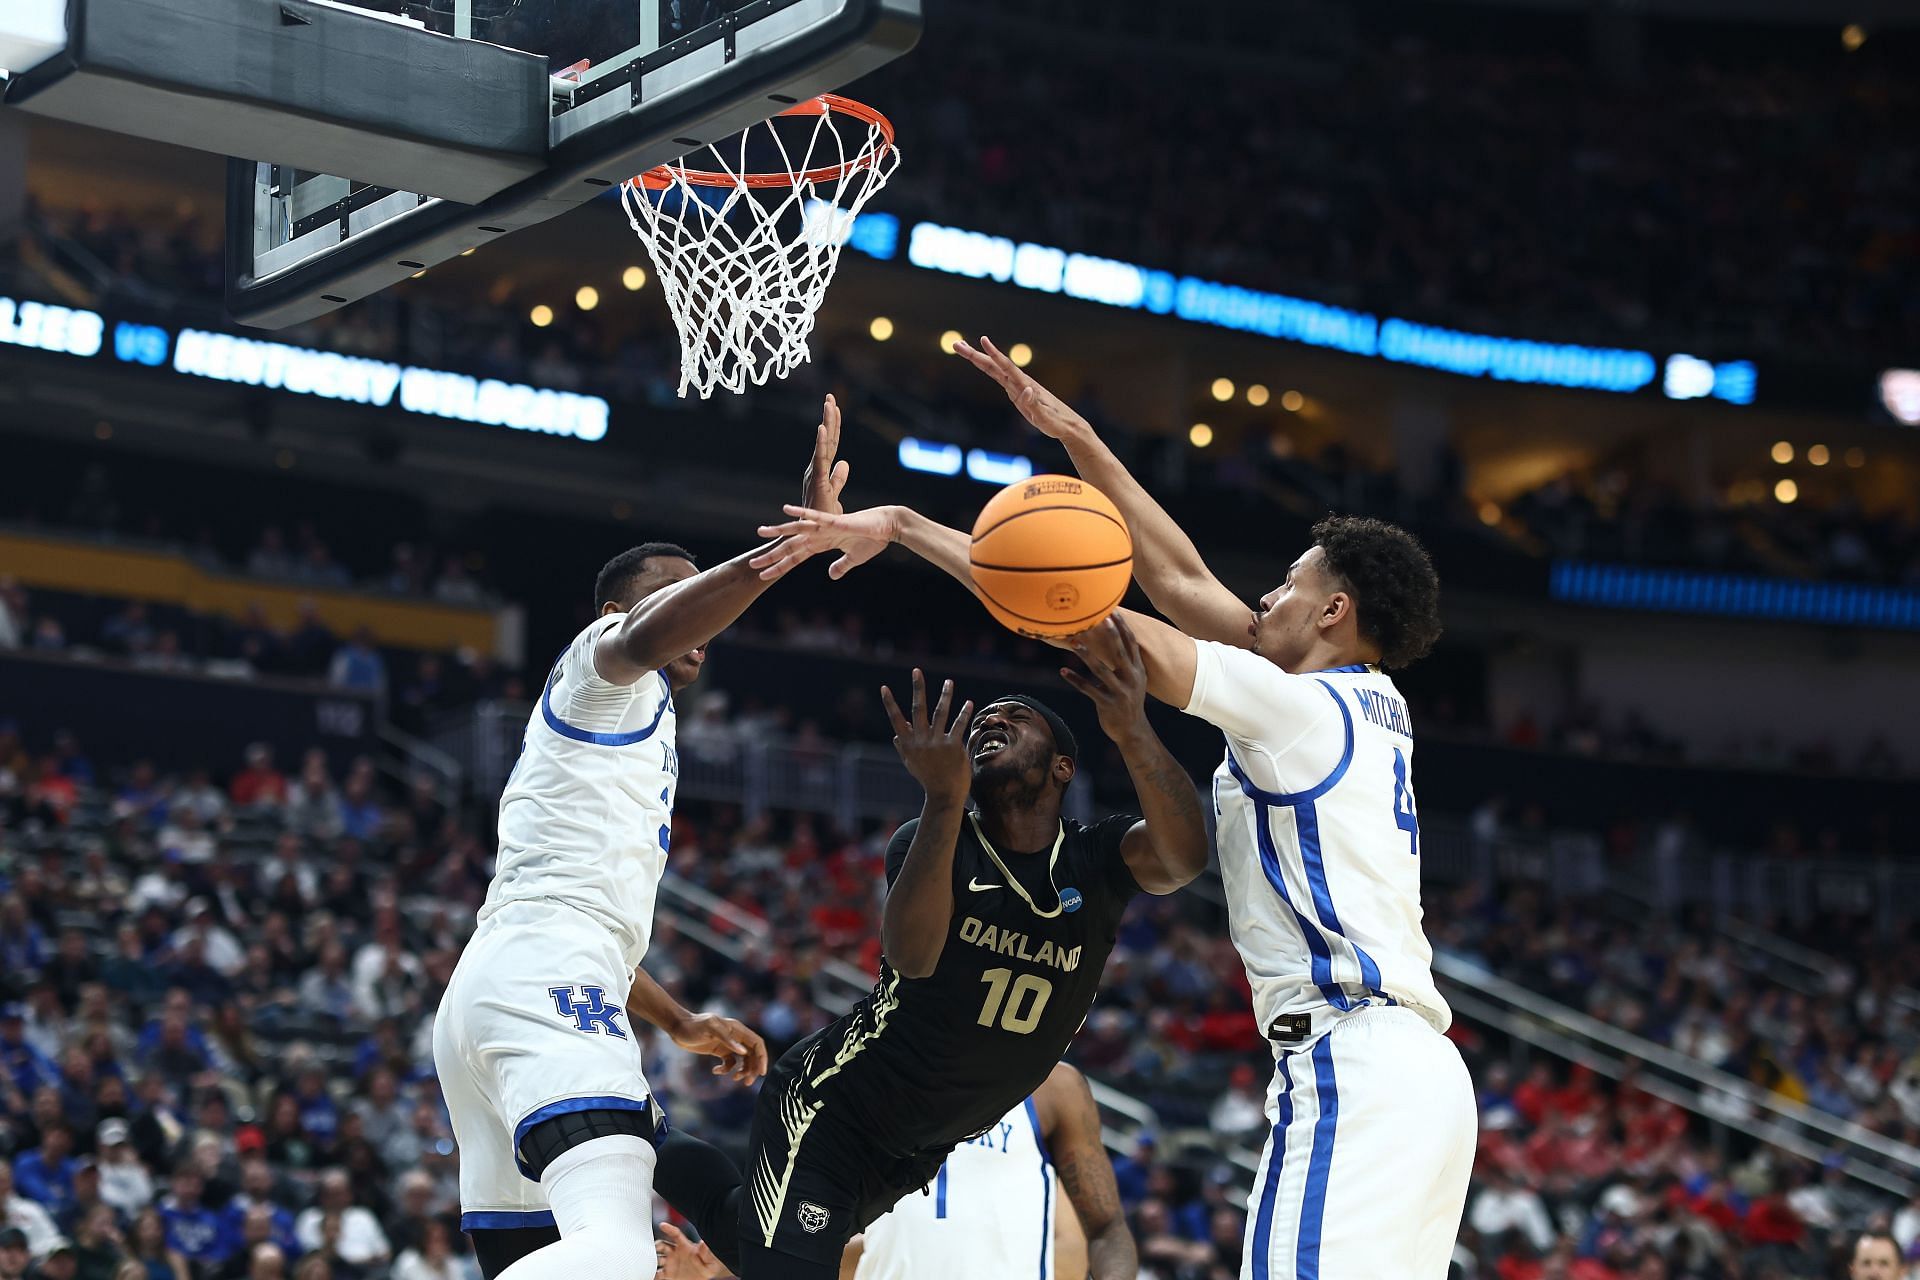 Tre Mitchell #4 of the Kentucky Wildcats blocks the shot of DQ Cole #10 of the Oakland Golden Grizzlies.